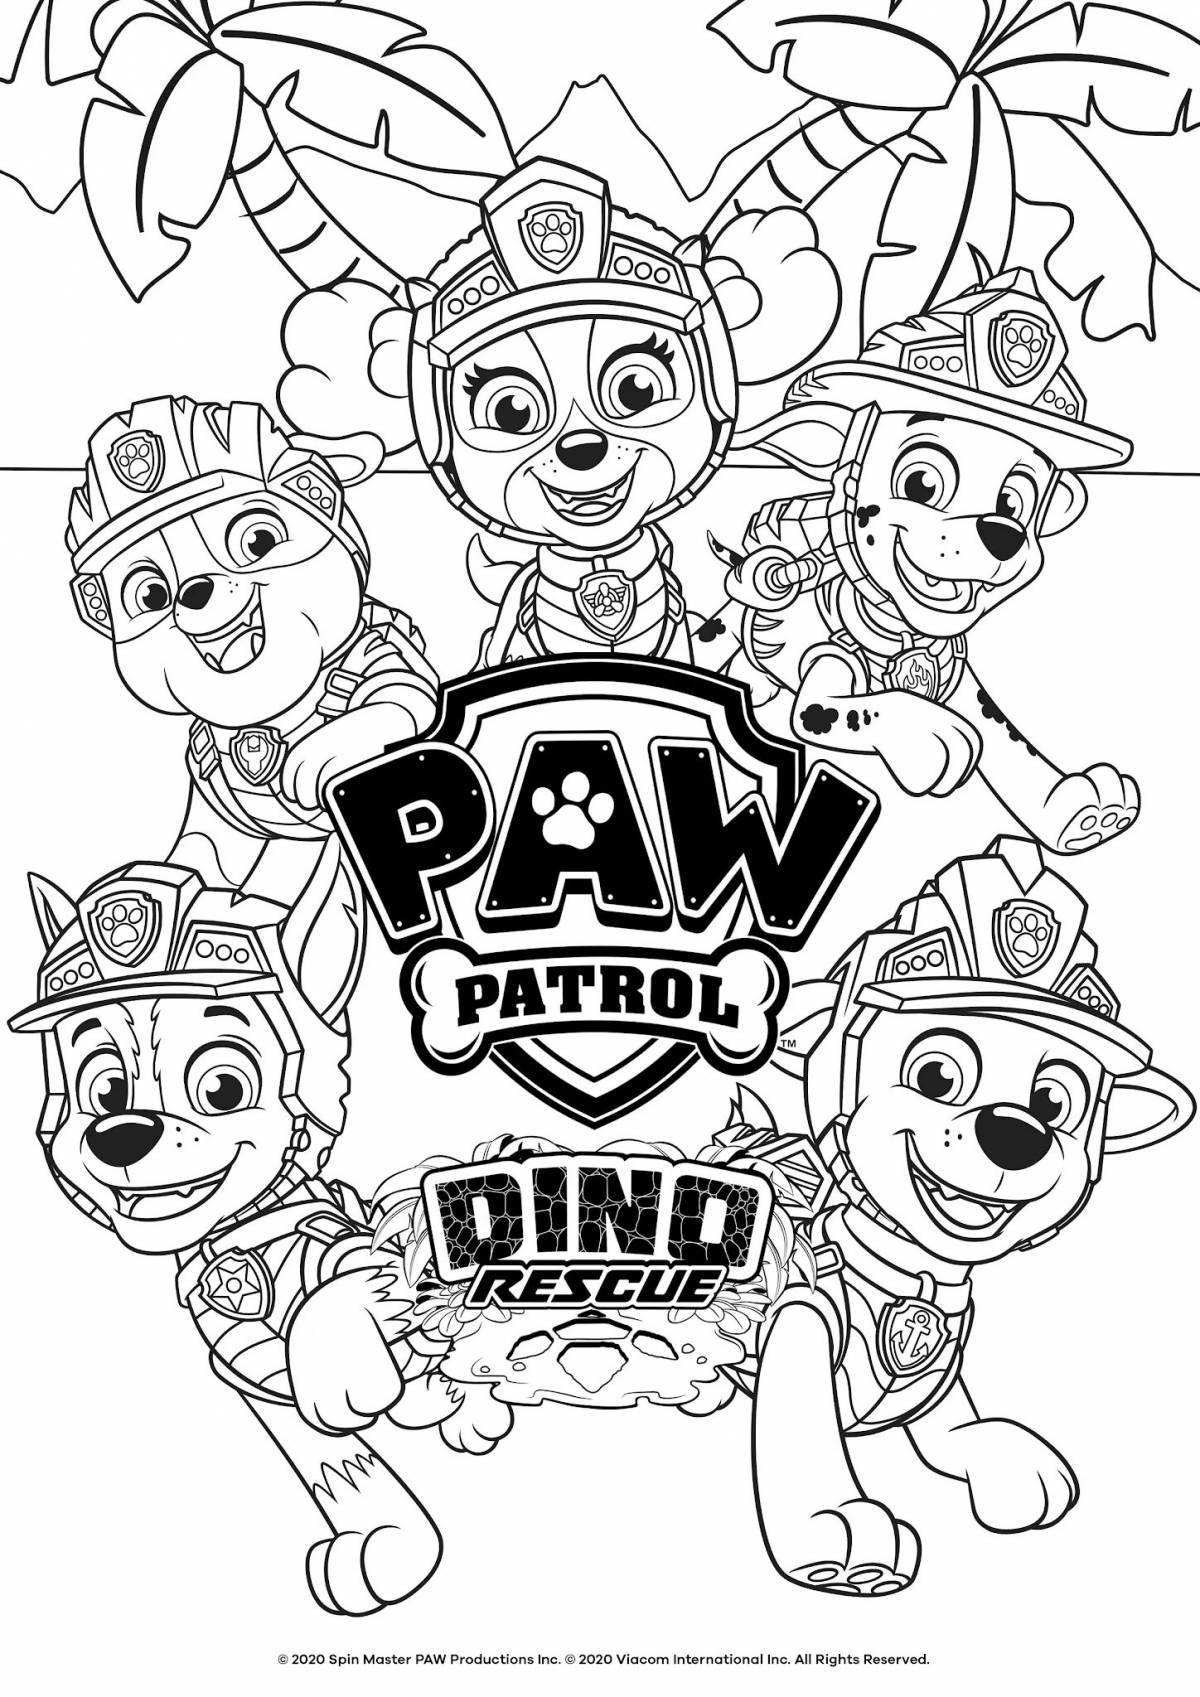 Paw patrol pirates coloring pages